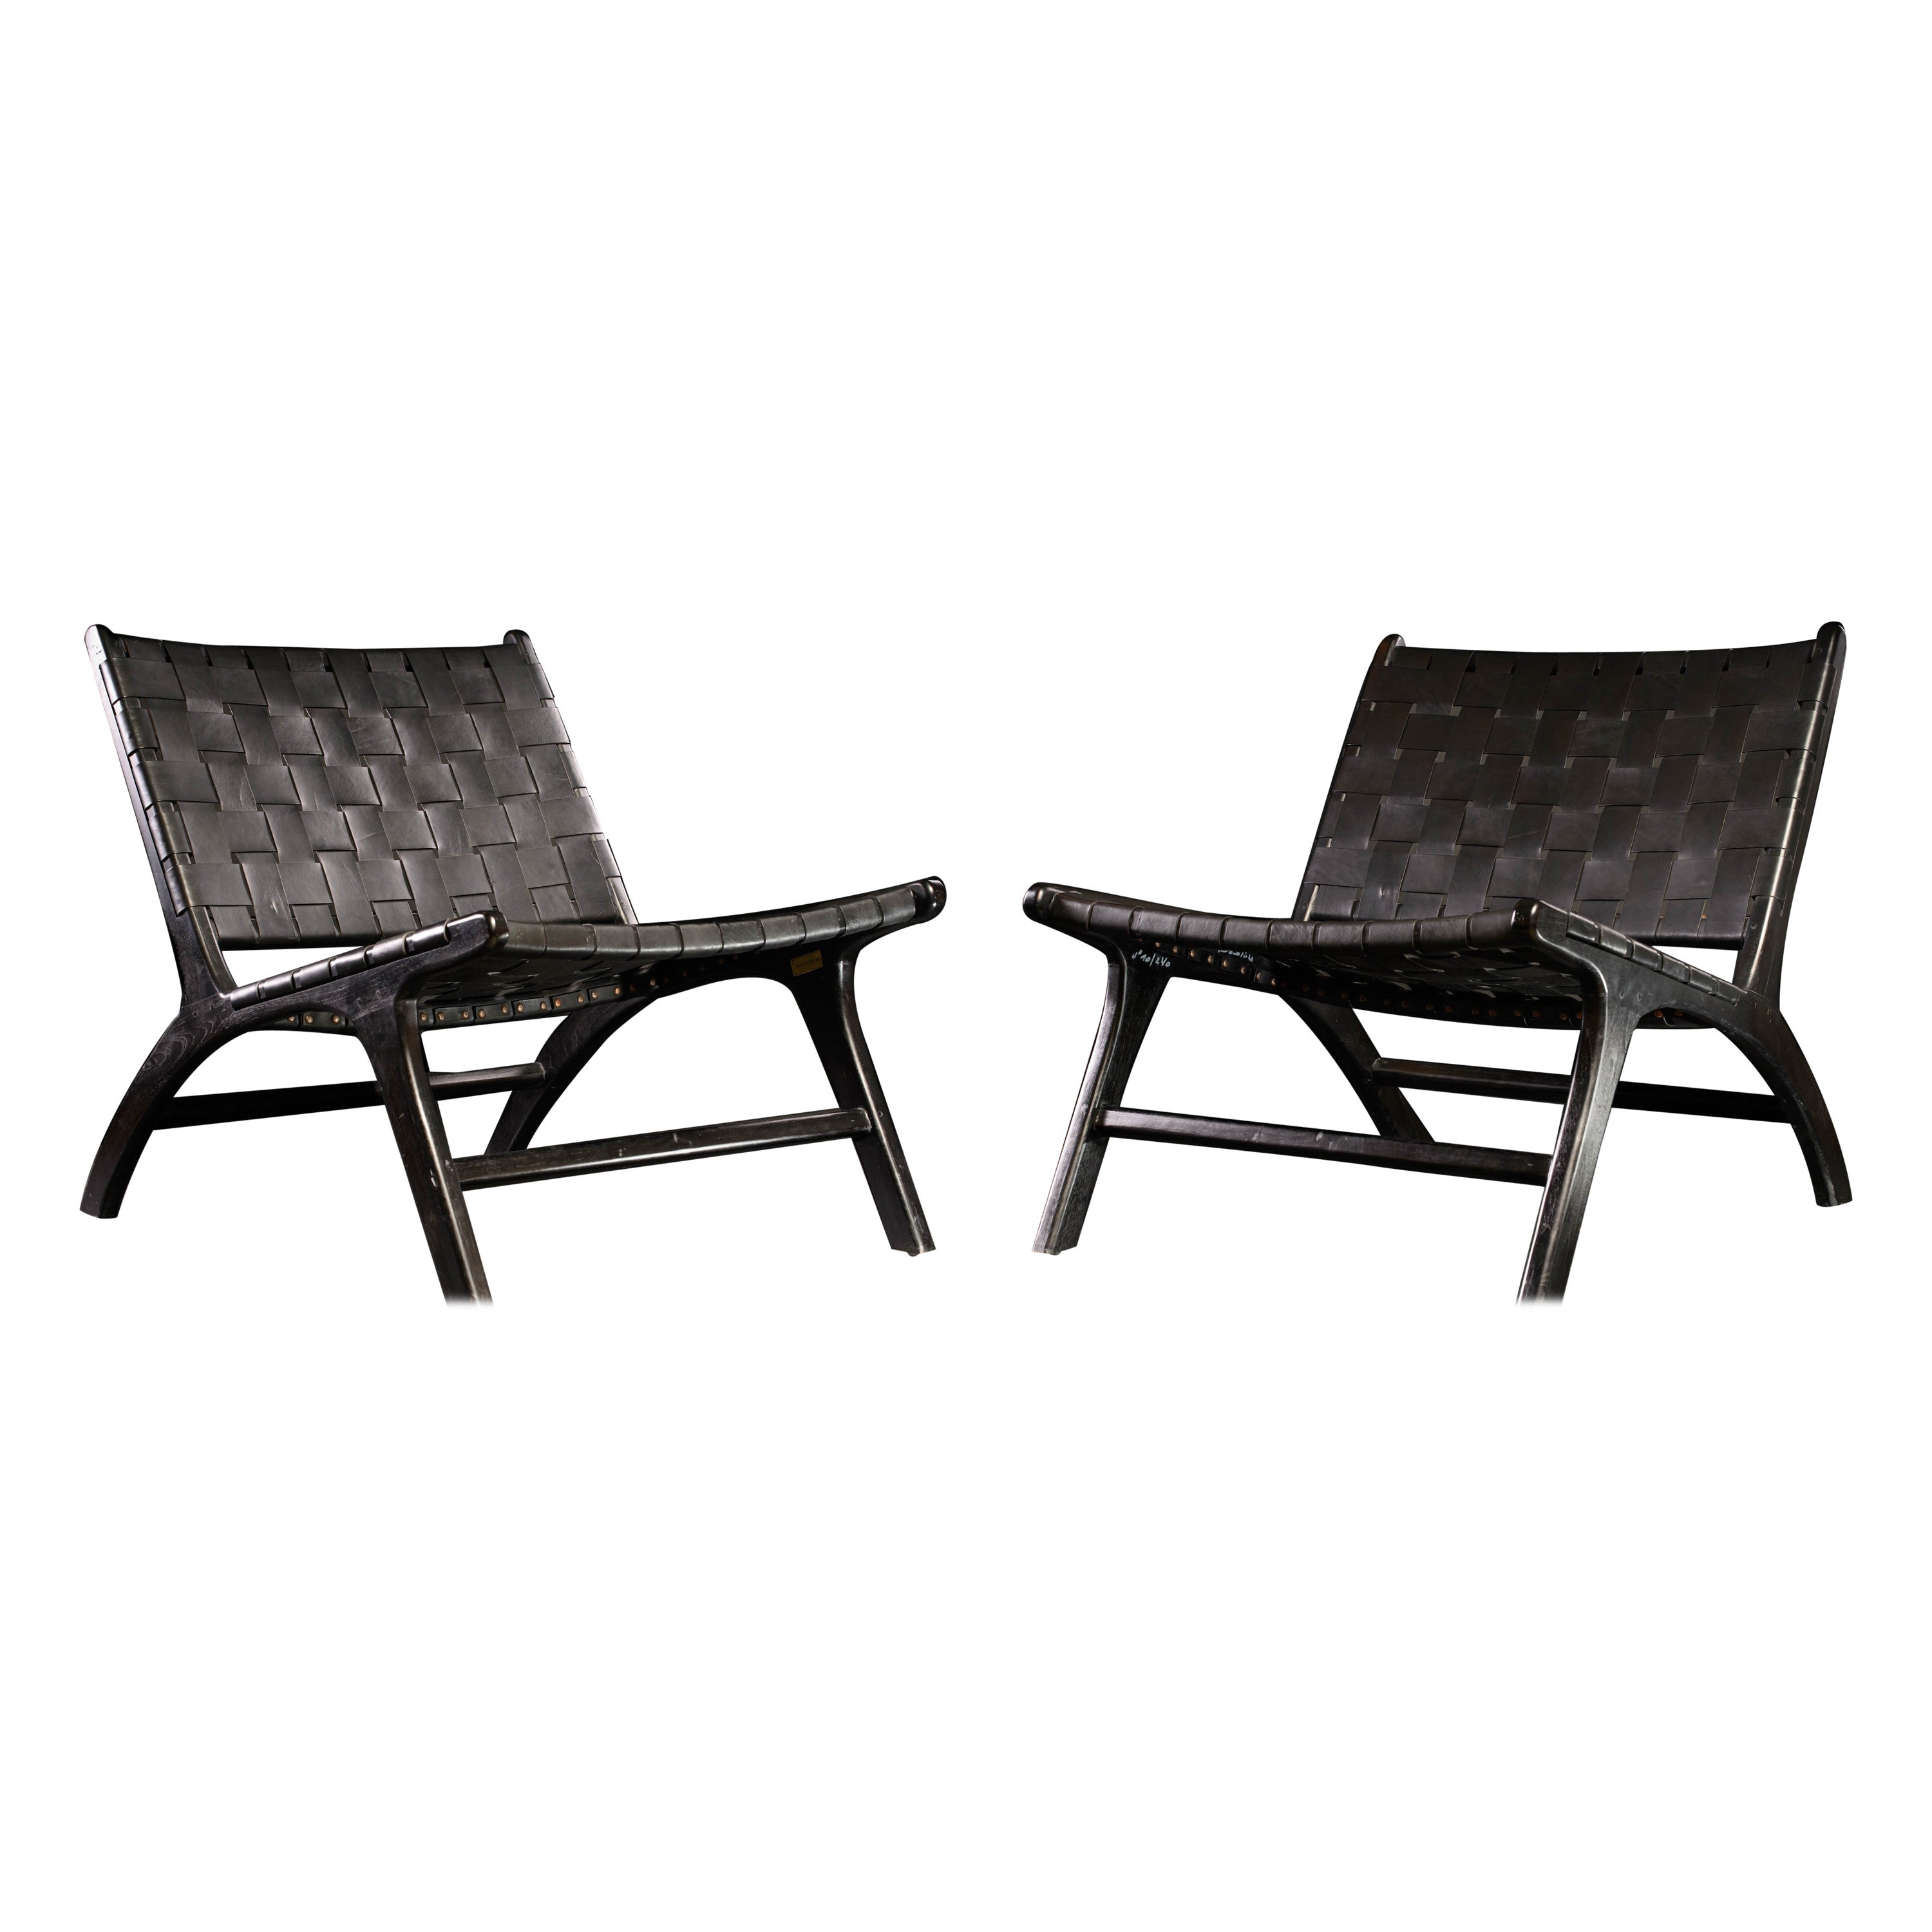 Olivier De Schrijver Ode design edition Pair of Leather woven Lounge chairs For Sale